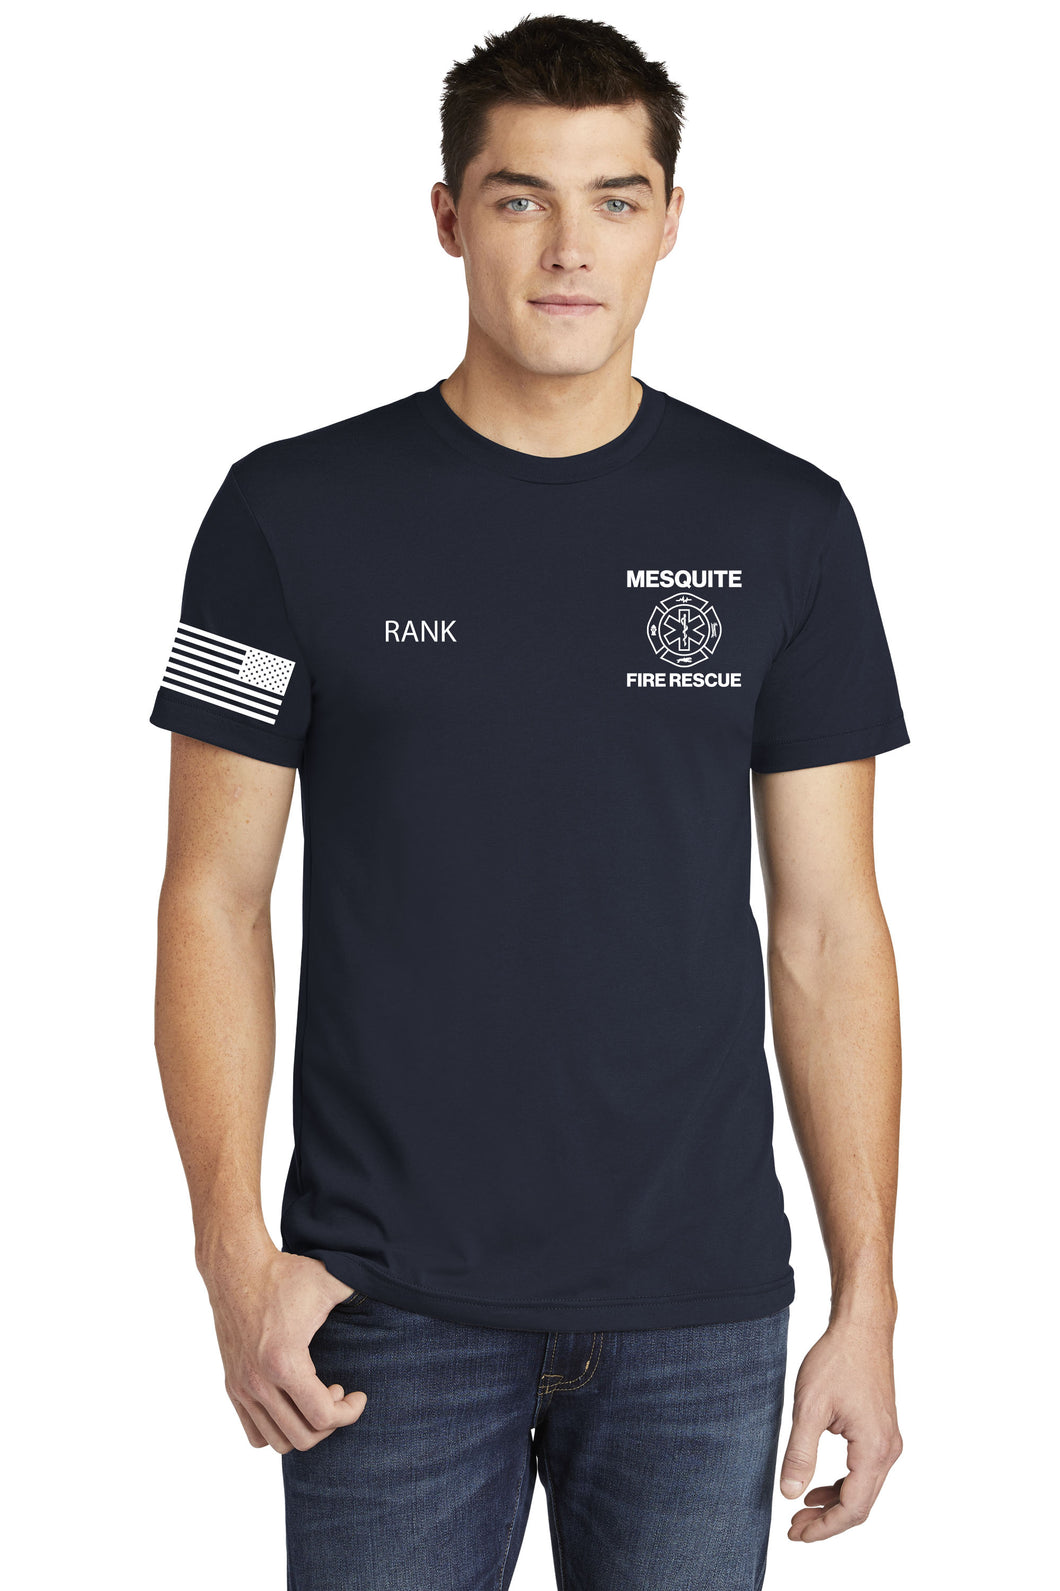 Mesquite Fire 50/50 American Apparel/Los Angeles Apparel Duty Shirts